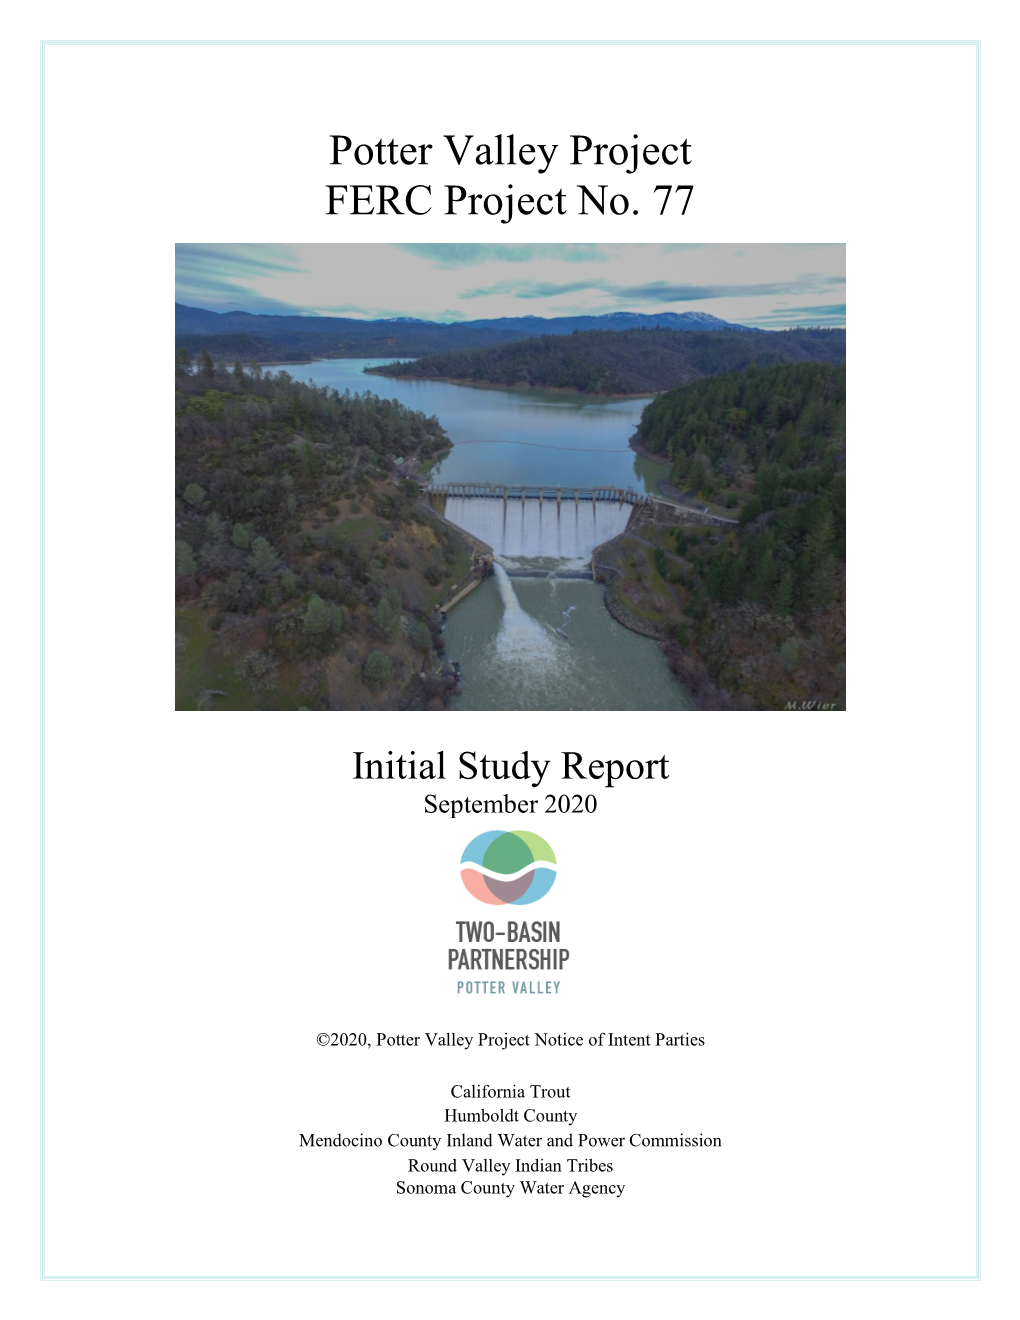 Initial Study Report for FERC Projects